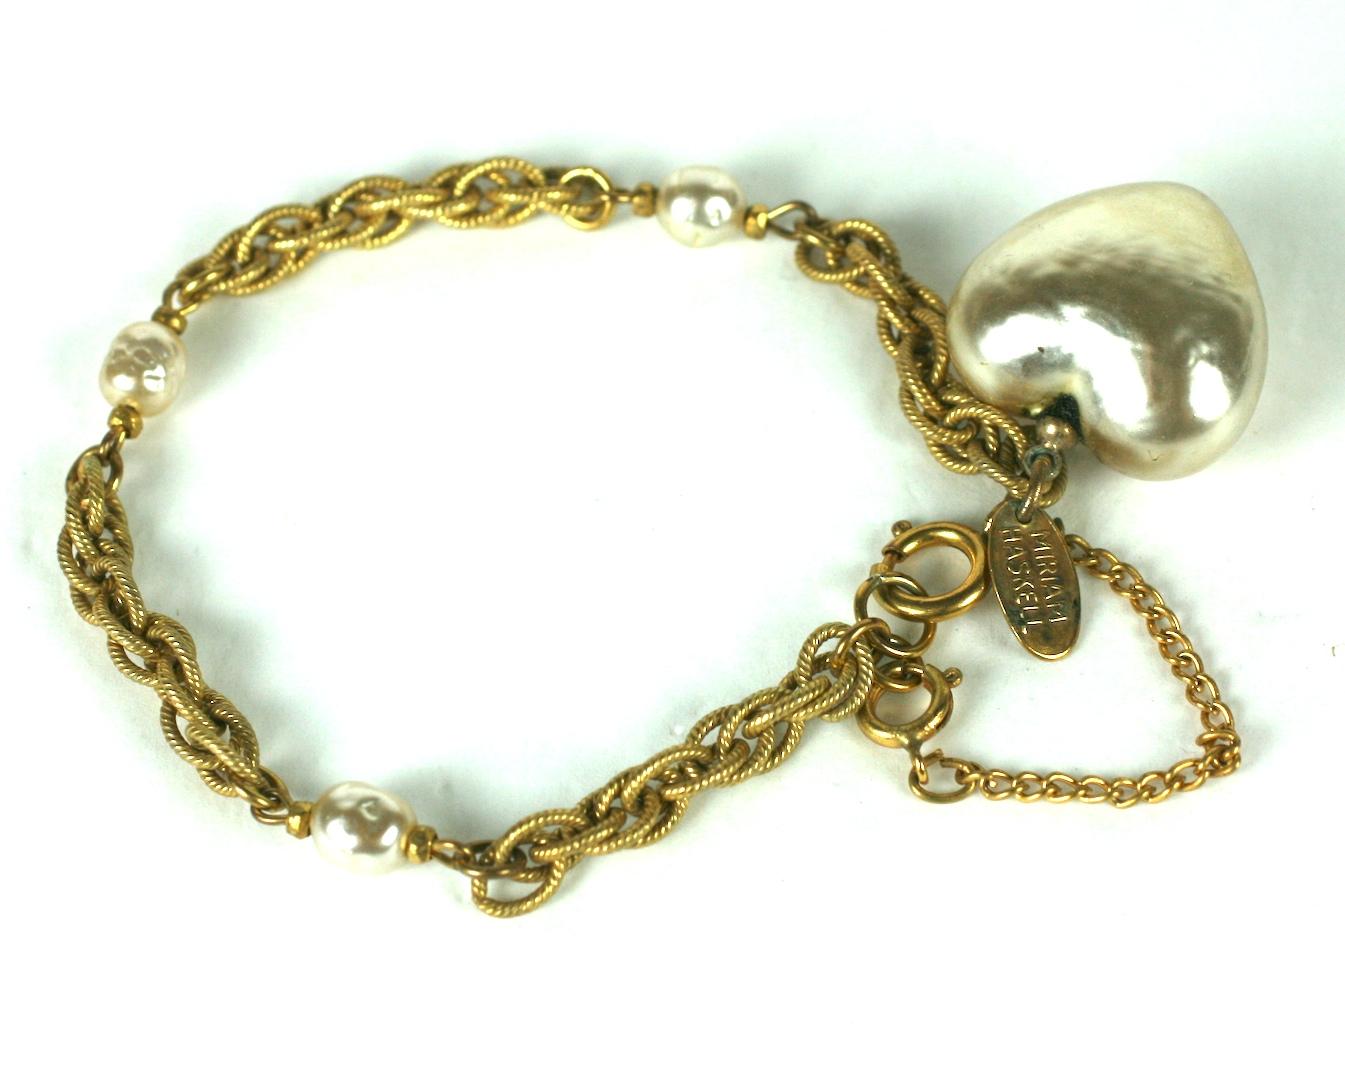 Miriam Haskell large faux baroque heart shape pearl fob bracelet. Of Russian gilt chain with signature baroque pearl and gilt cut steel bead spacers. Excellent condition. Signed.
Length  7 1/2